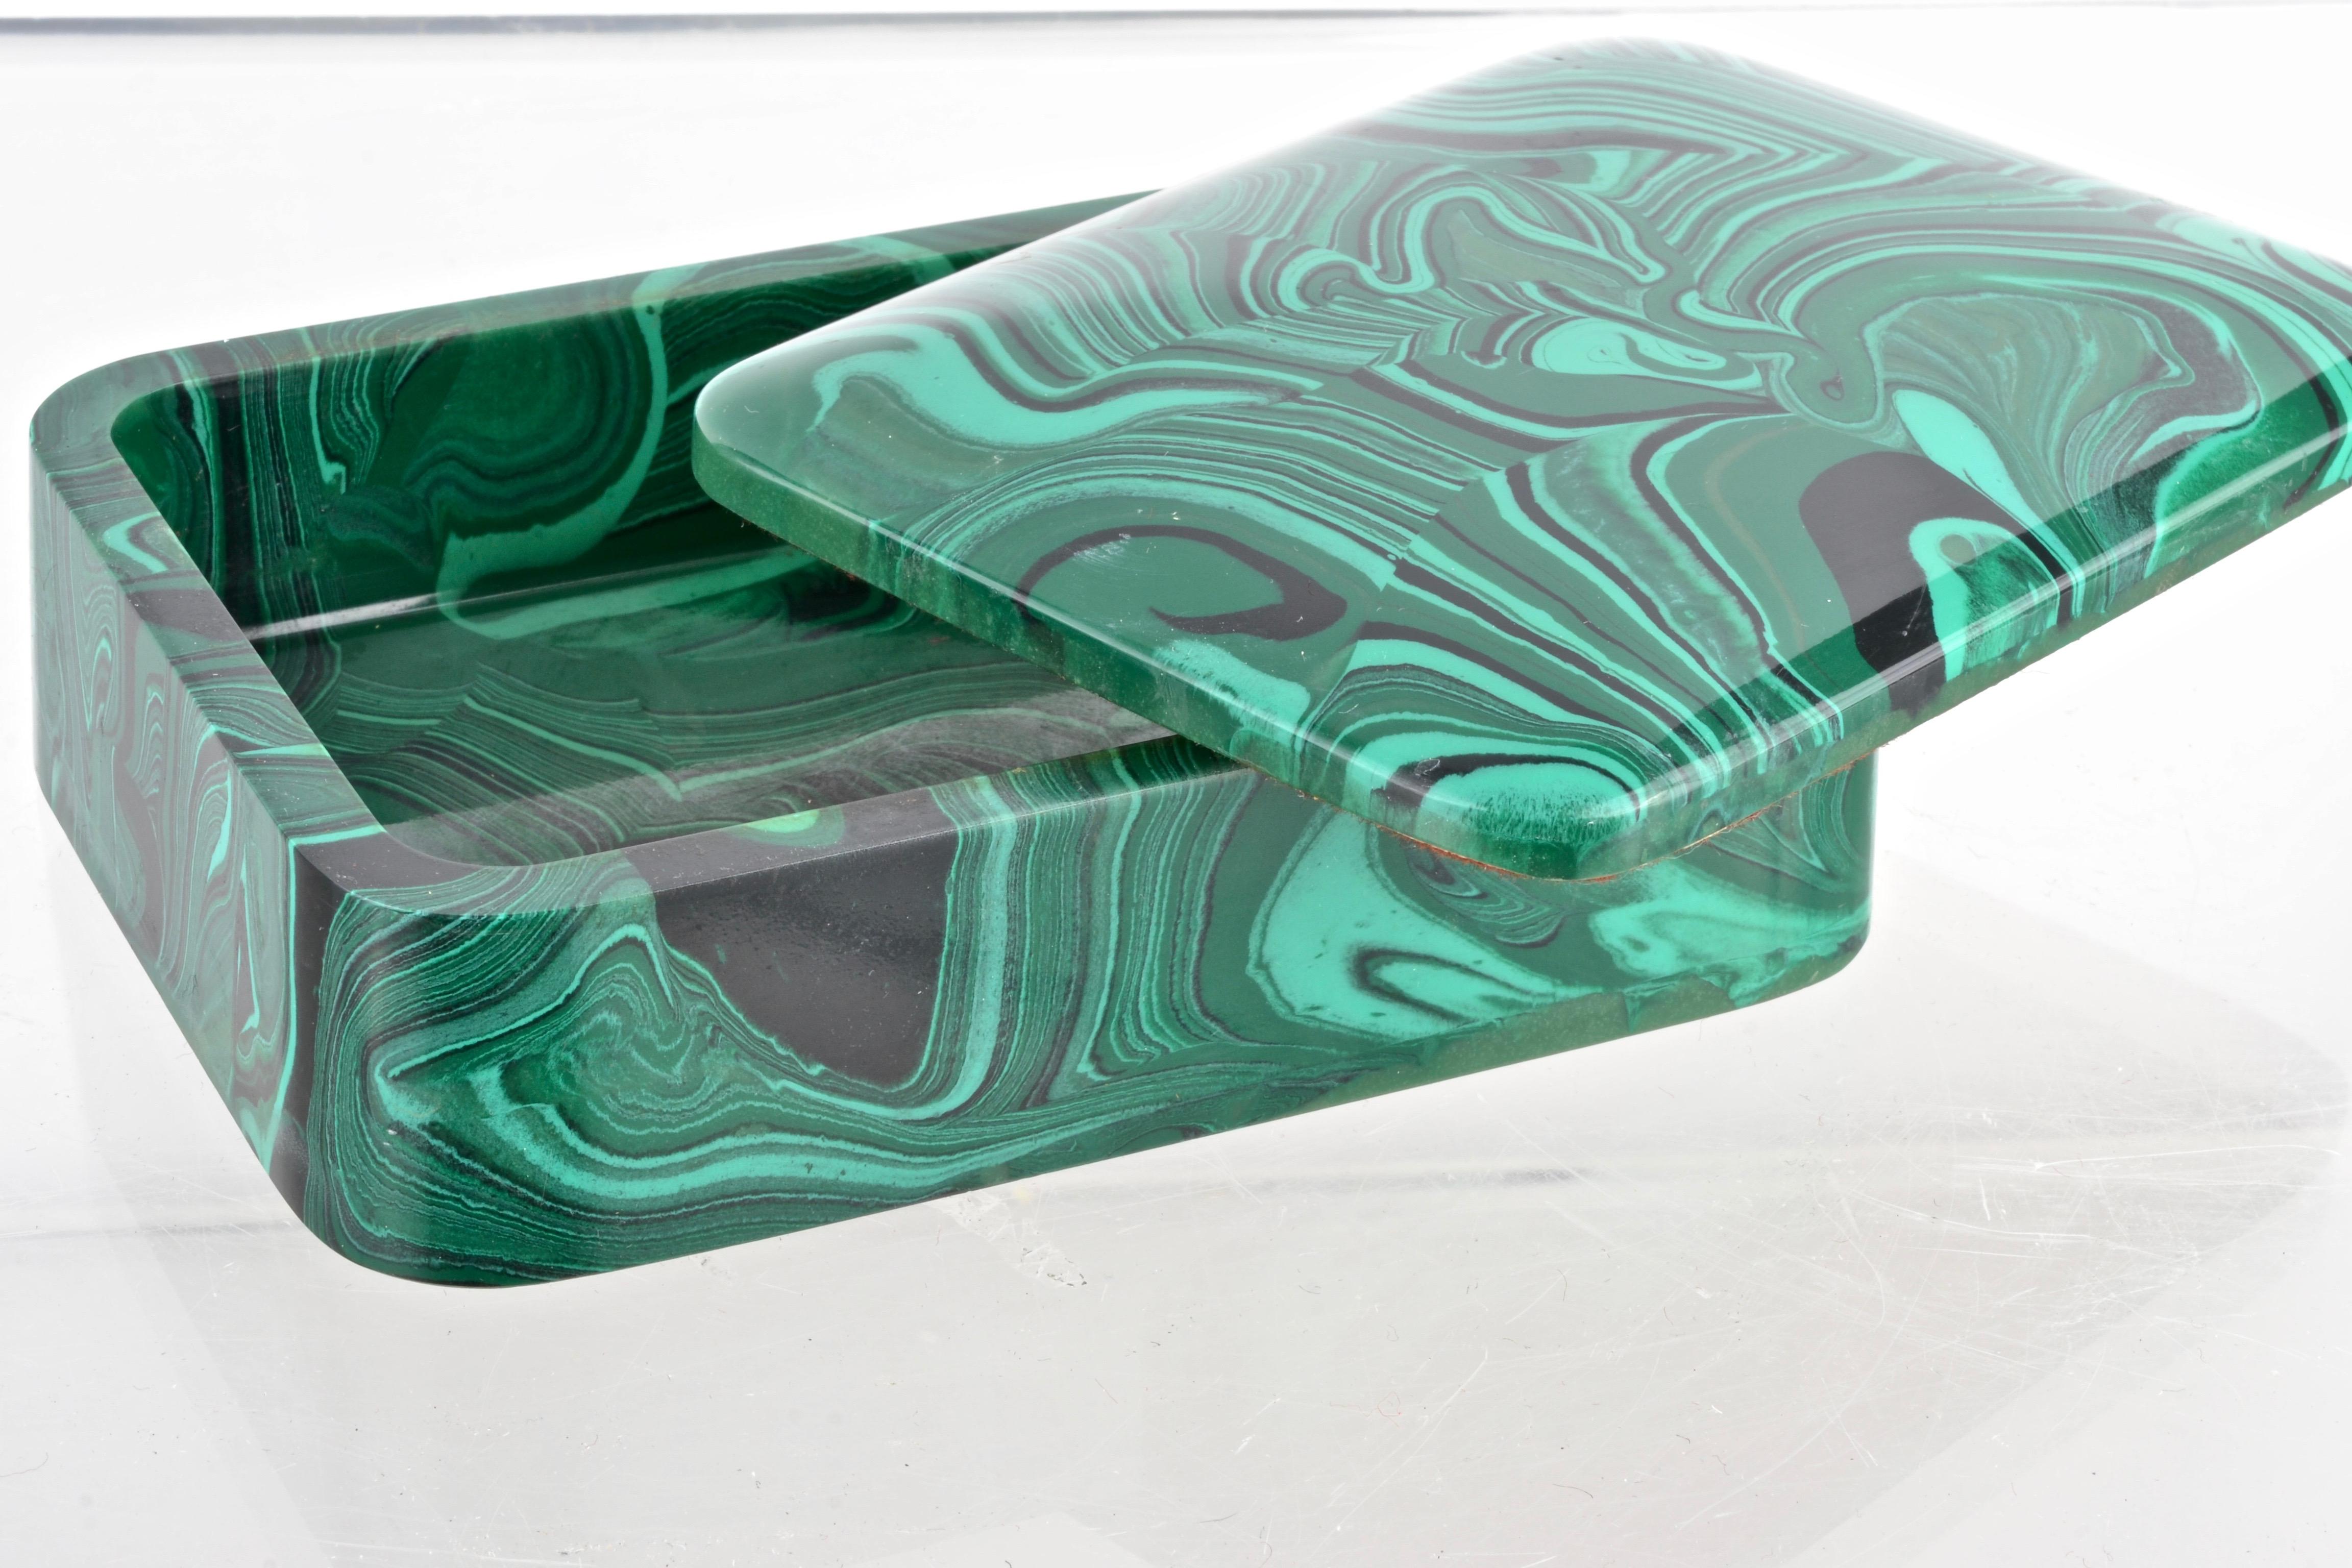 High quality faux malachite box, made of a specialty composition. Heavy and pleasing to the touch. Malachite design continues inside the box. Great color.